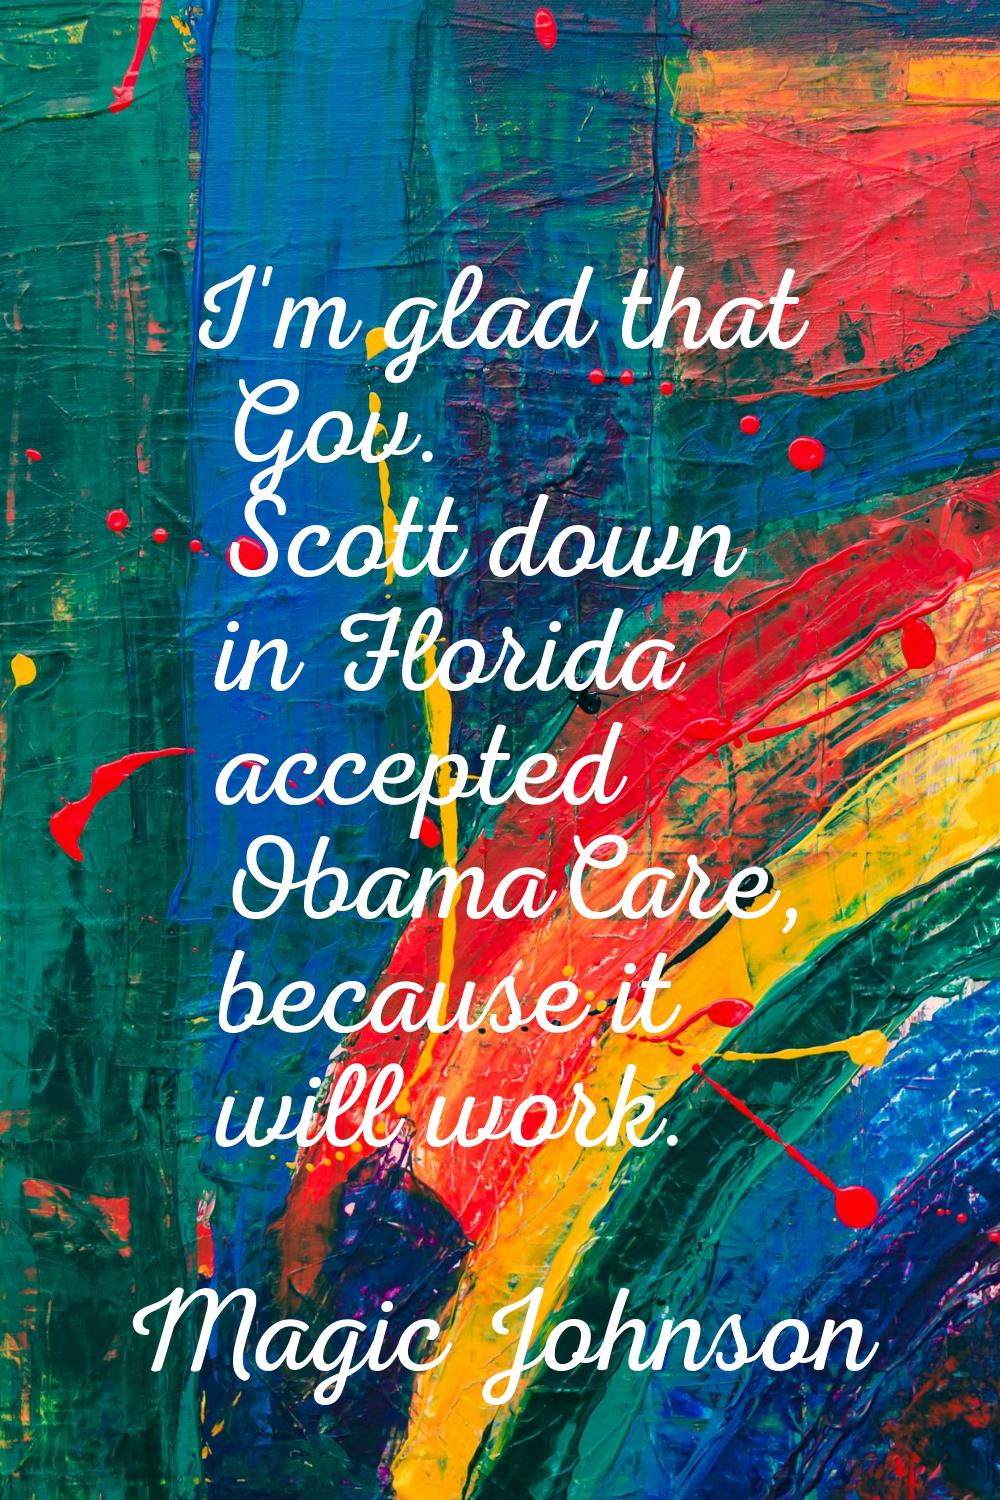 I'm glad that Gov. Scott down in Florida accepted ObamaCare, because it will work.